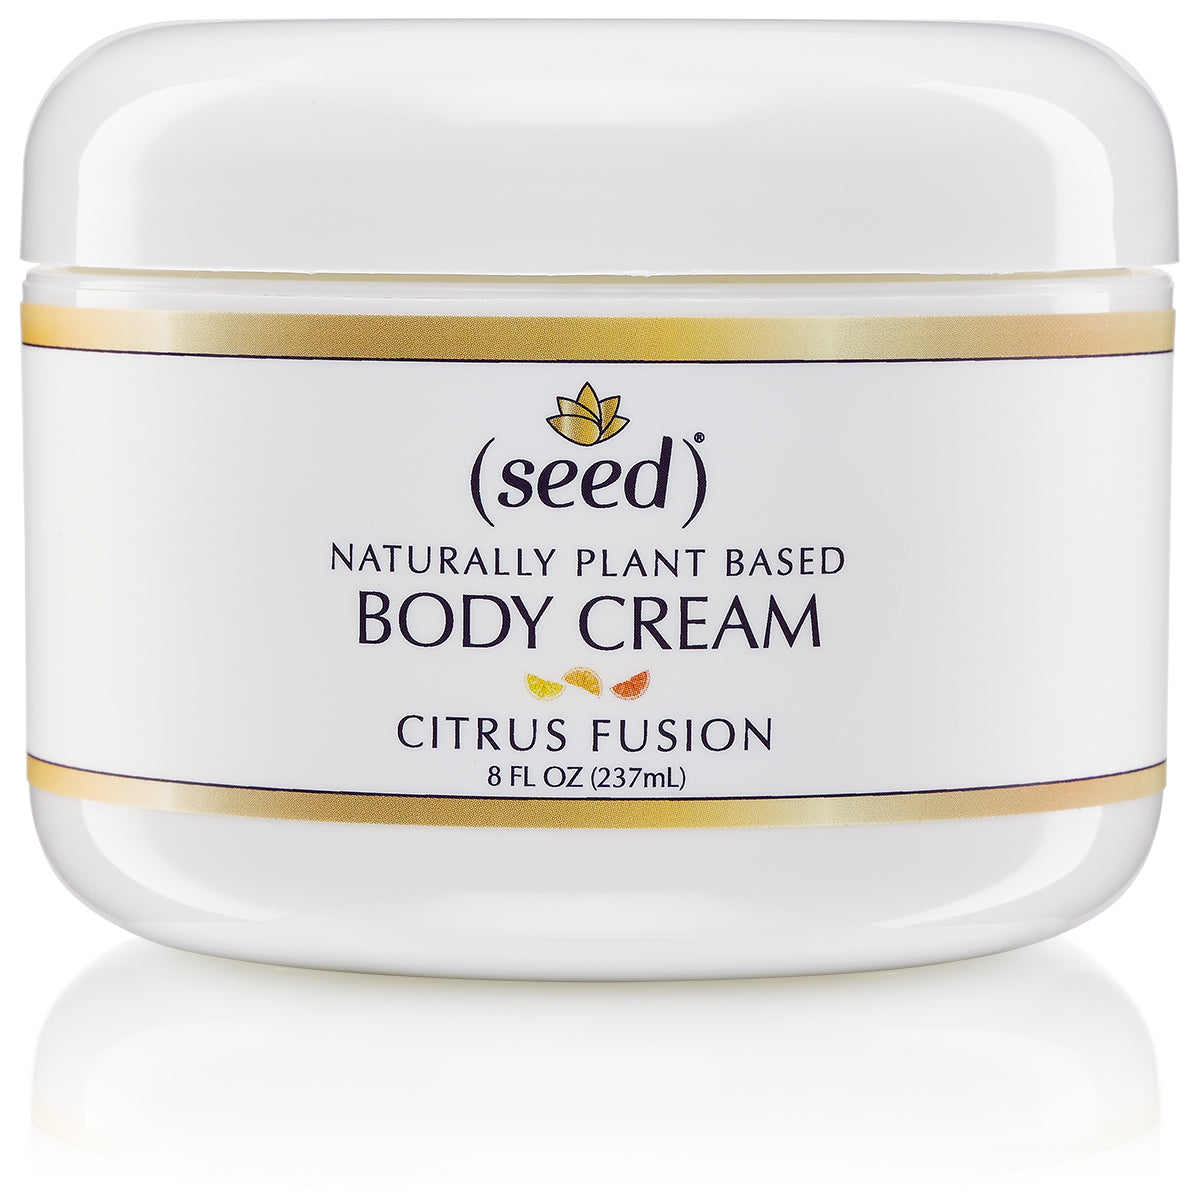 Seed Citrus Fusion Silky and Rich Body Cream